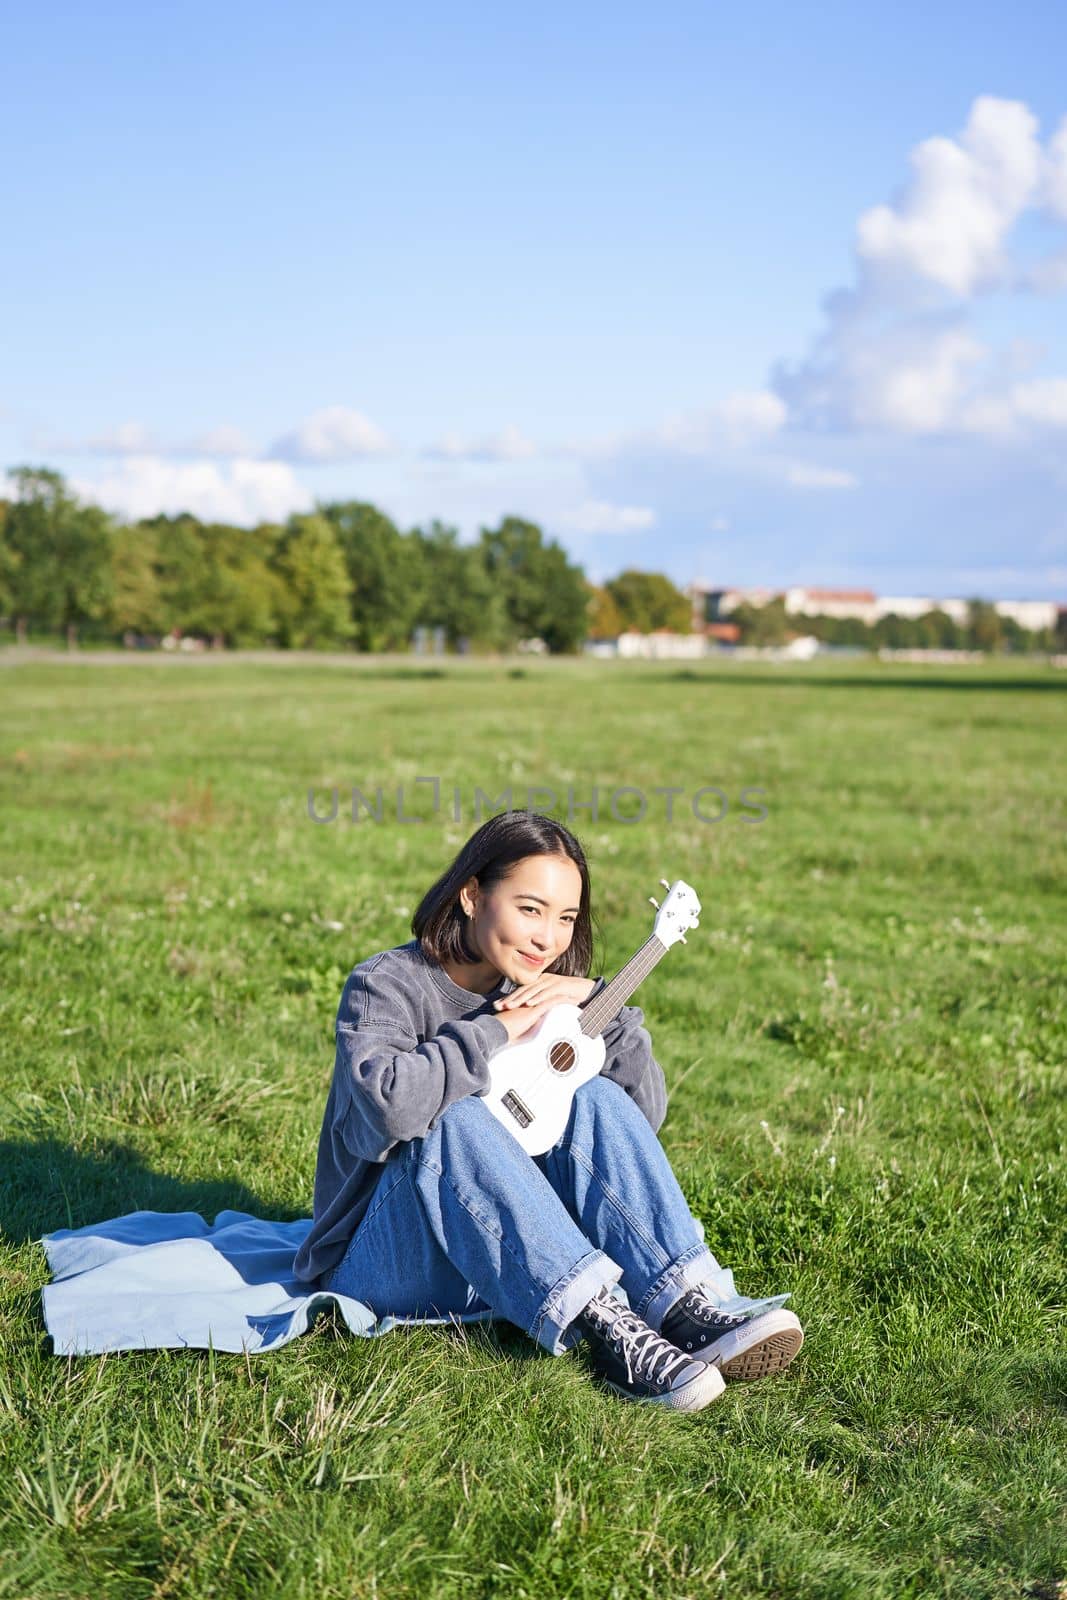 Portrait of asian girl sitting alone in park, playing ukulele and singing, enjoying leisure time. Copy space